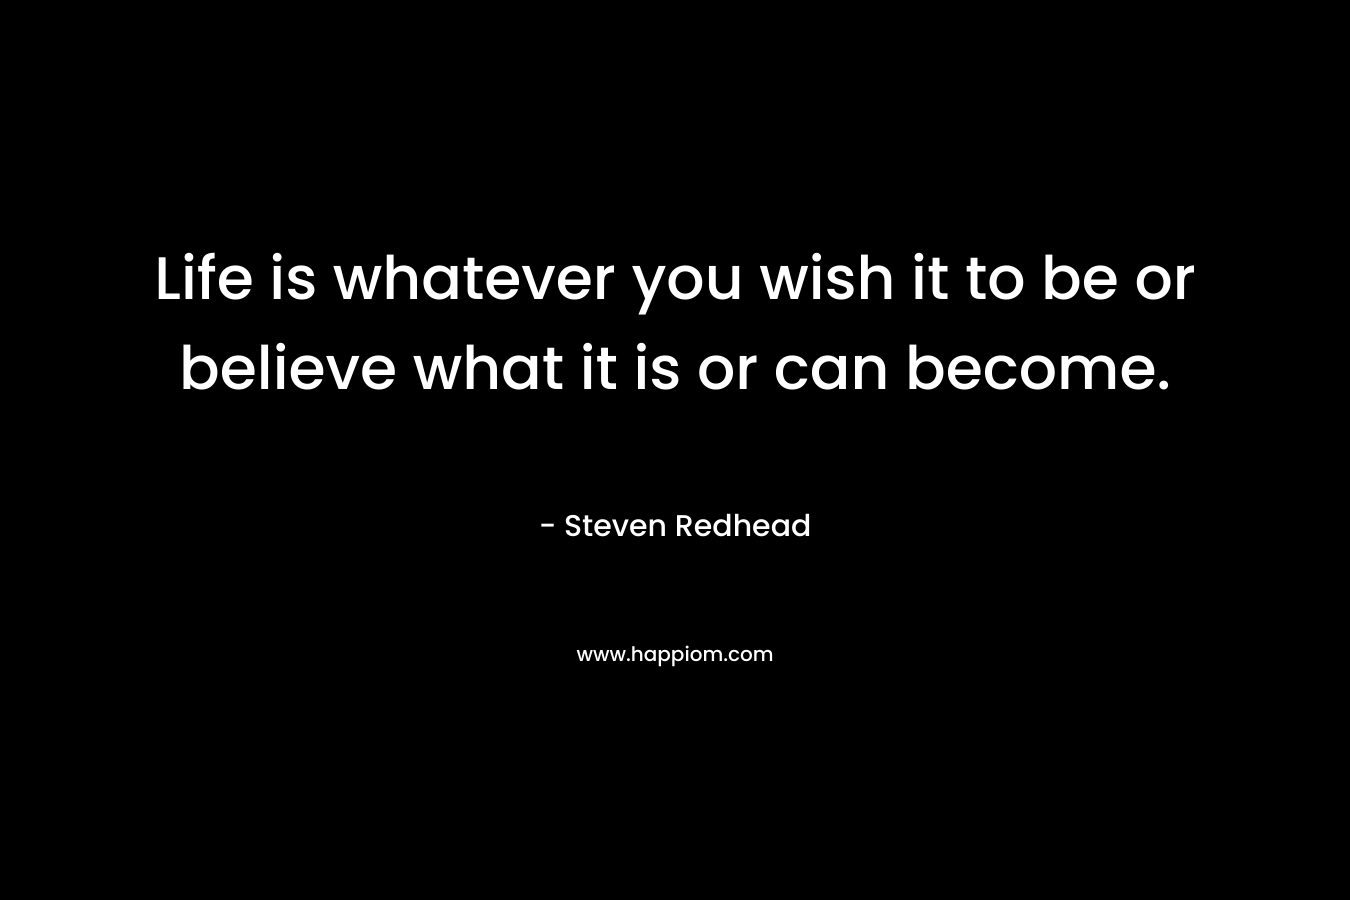 Life is whatever you wish it to be or believe what it is or can become.